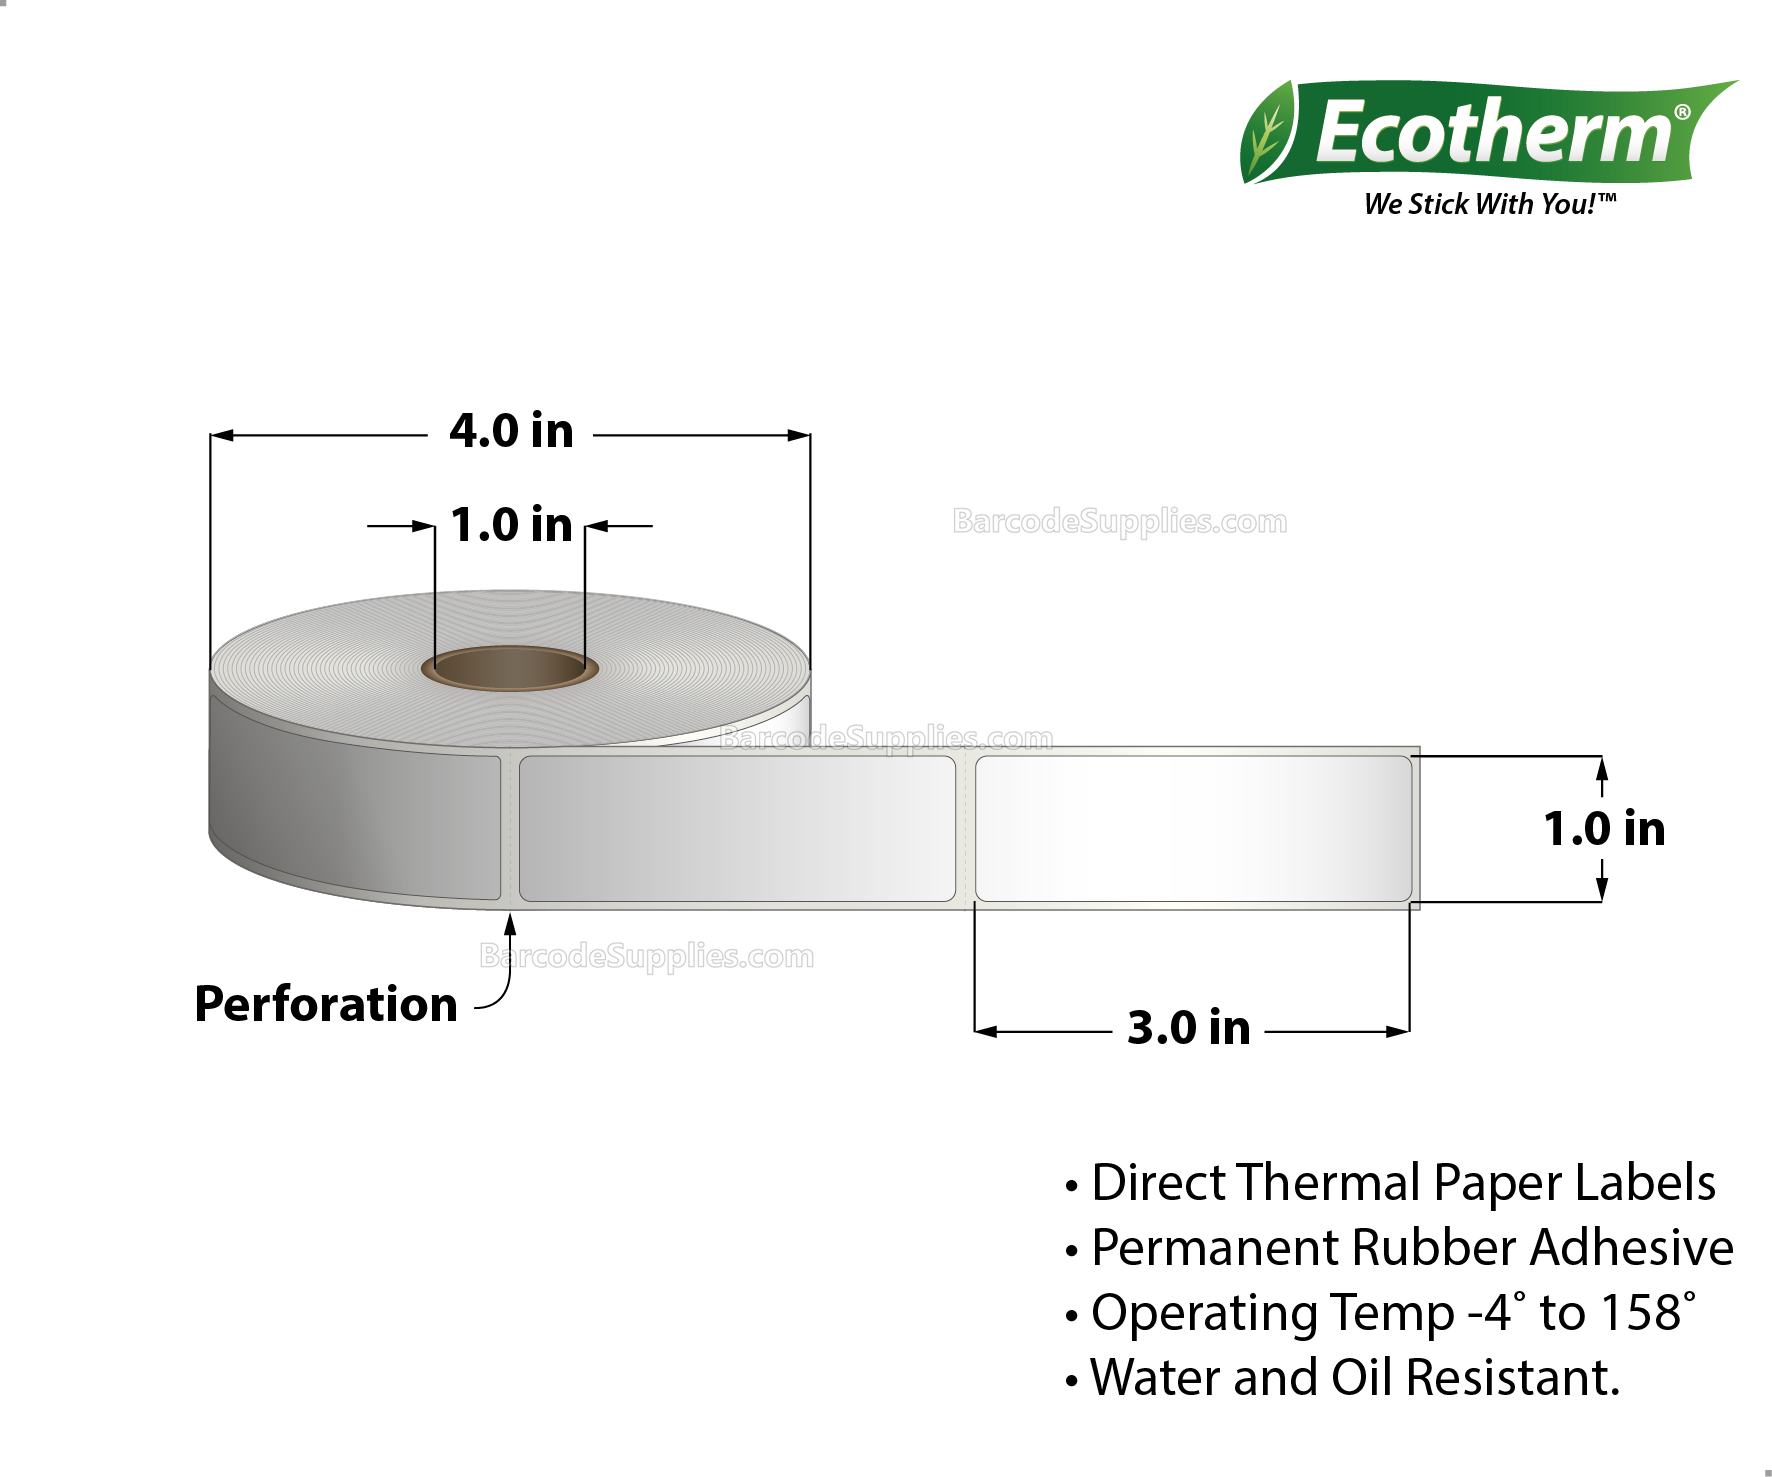 1 x 3 Direct Thermal White Labels With Rubber Adhesive - Perforated - 840 Labels Per Roll - Carton Of 6 Rolls - 5040 Labels Total - MPN: ECOTHERM15112-6